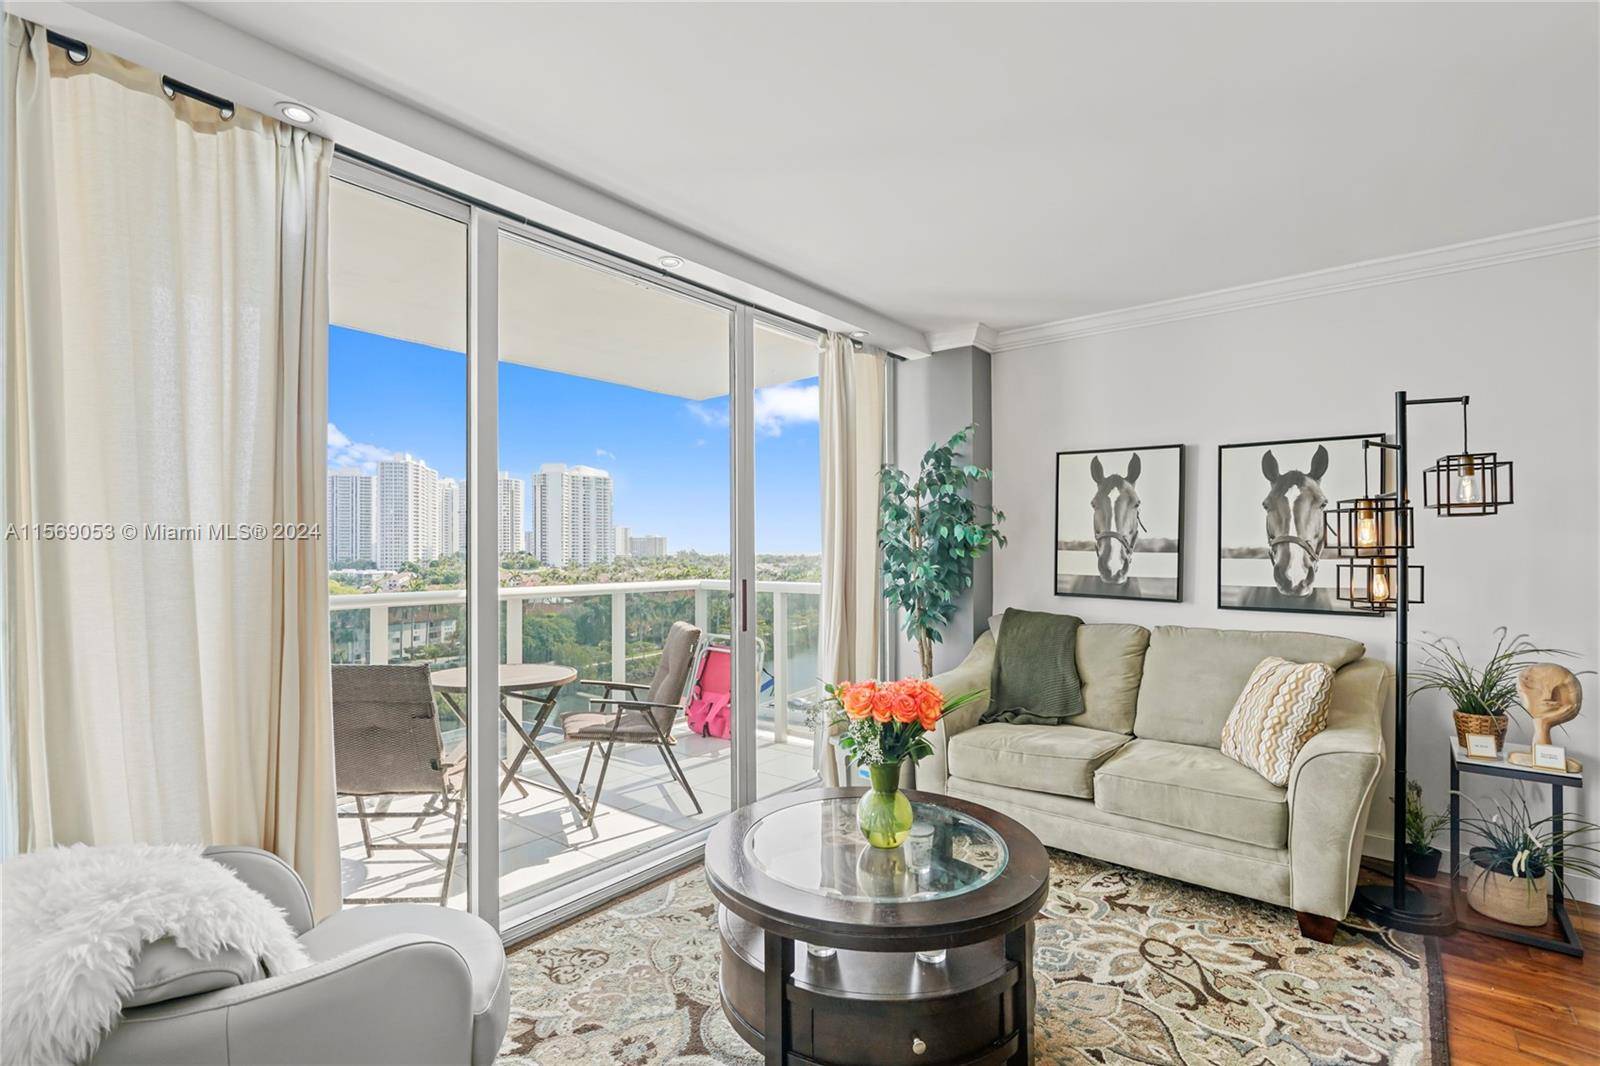 Beautiful renovated two bedroom condo located along Country Club Dr in the heart of Aventura next to the Turnberry golf.